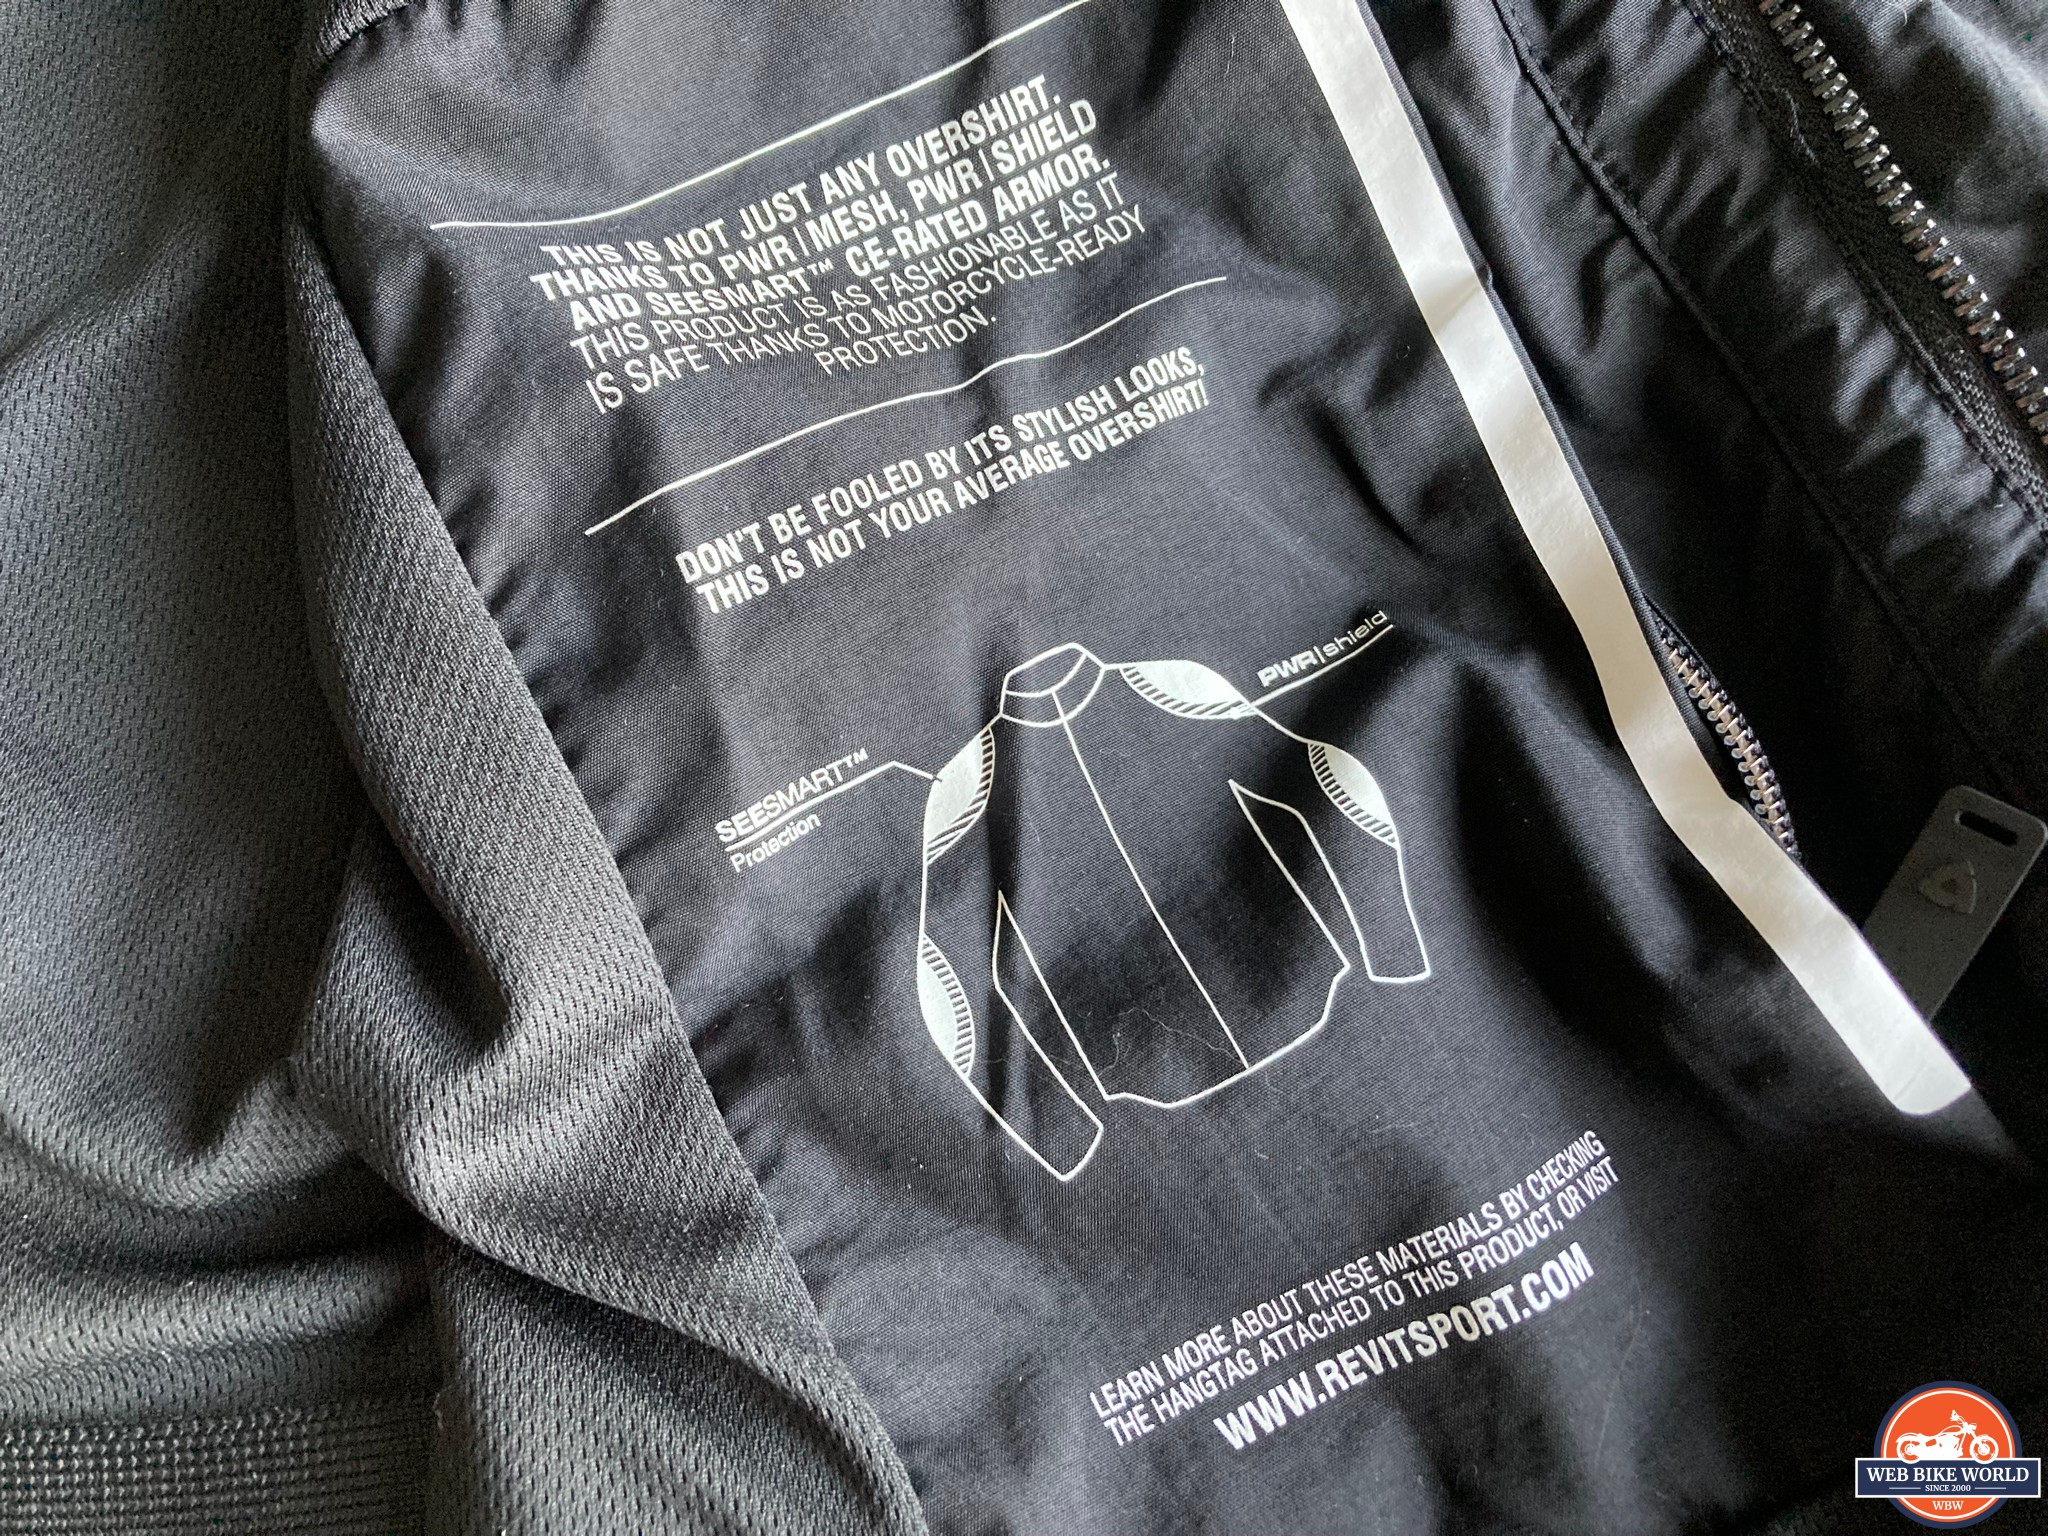 Interior stamp on the overshirt showing protection areas